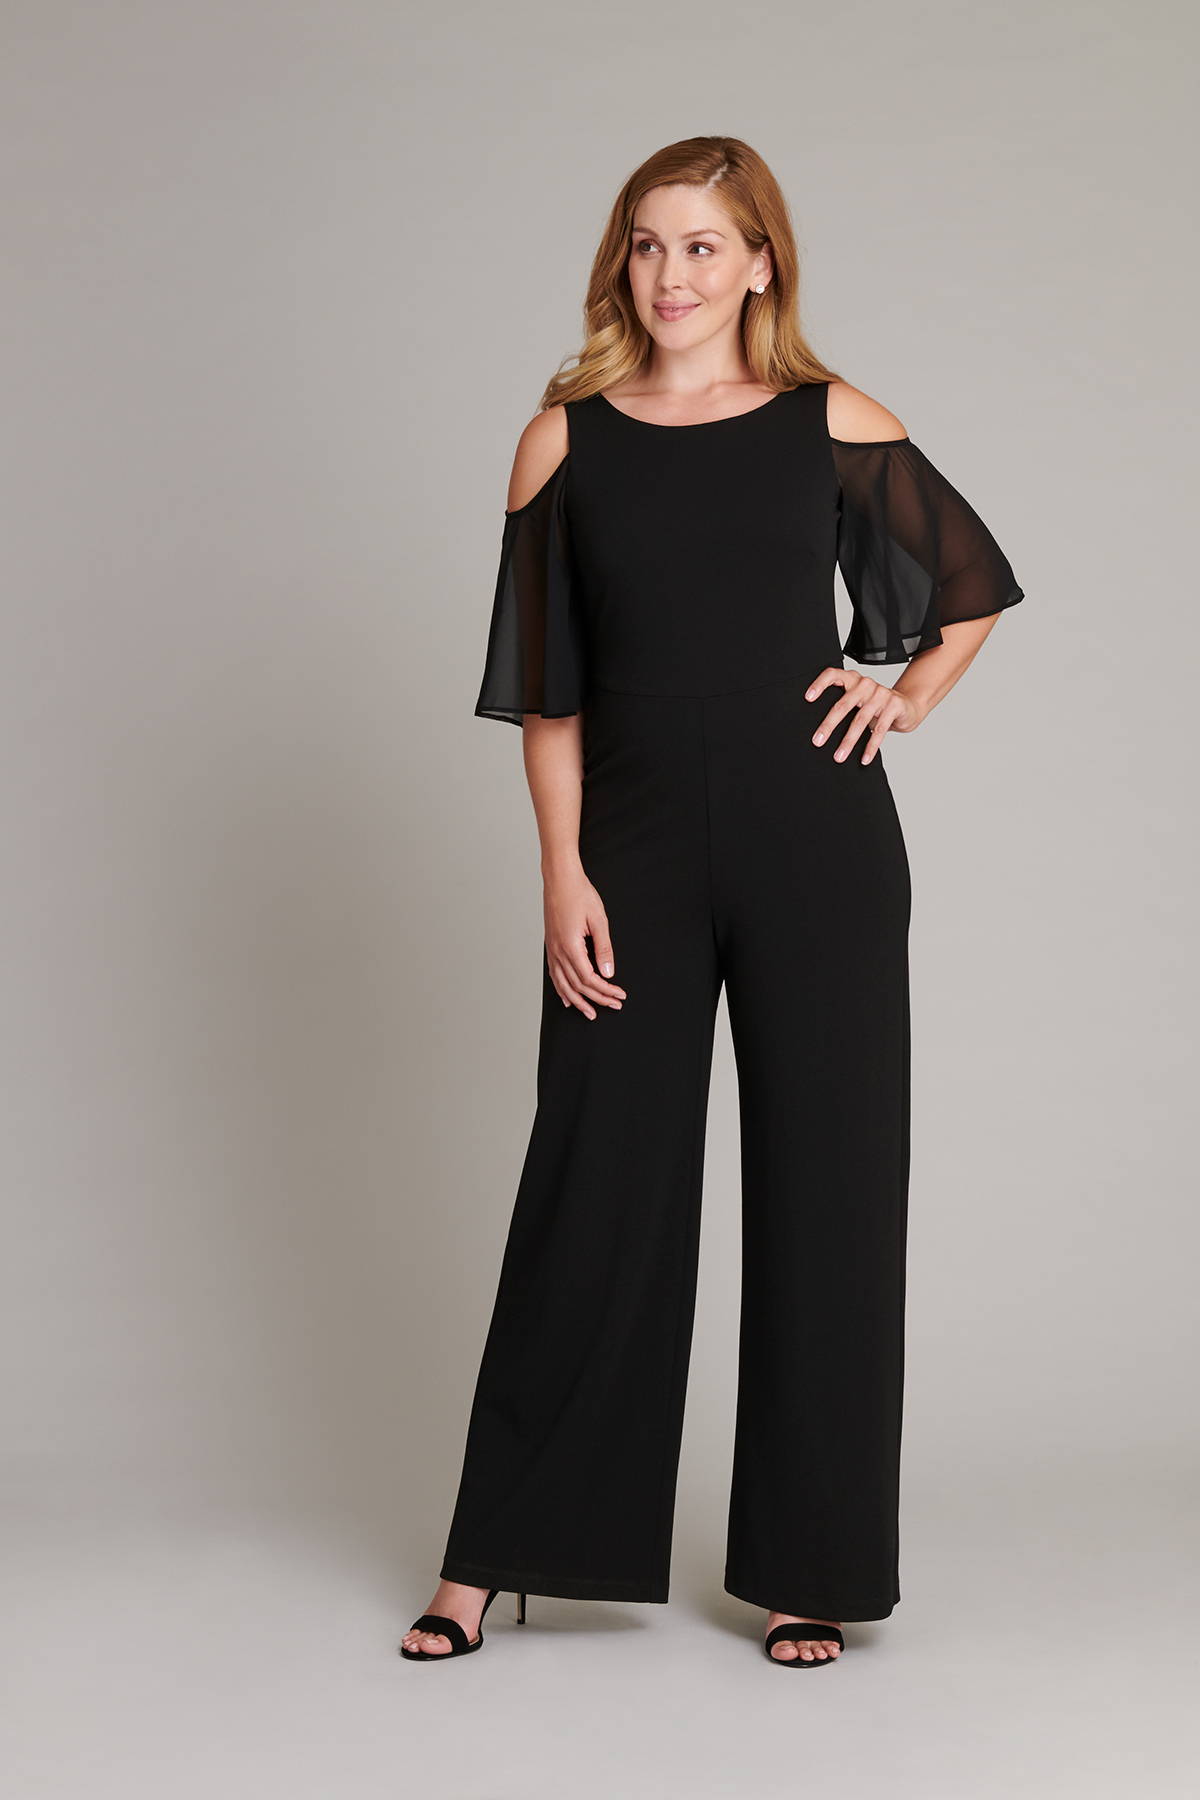 woman posing in black full-length connected apparel jumpsuit with could shoulders and chiffon short sleeves